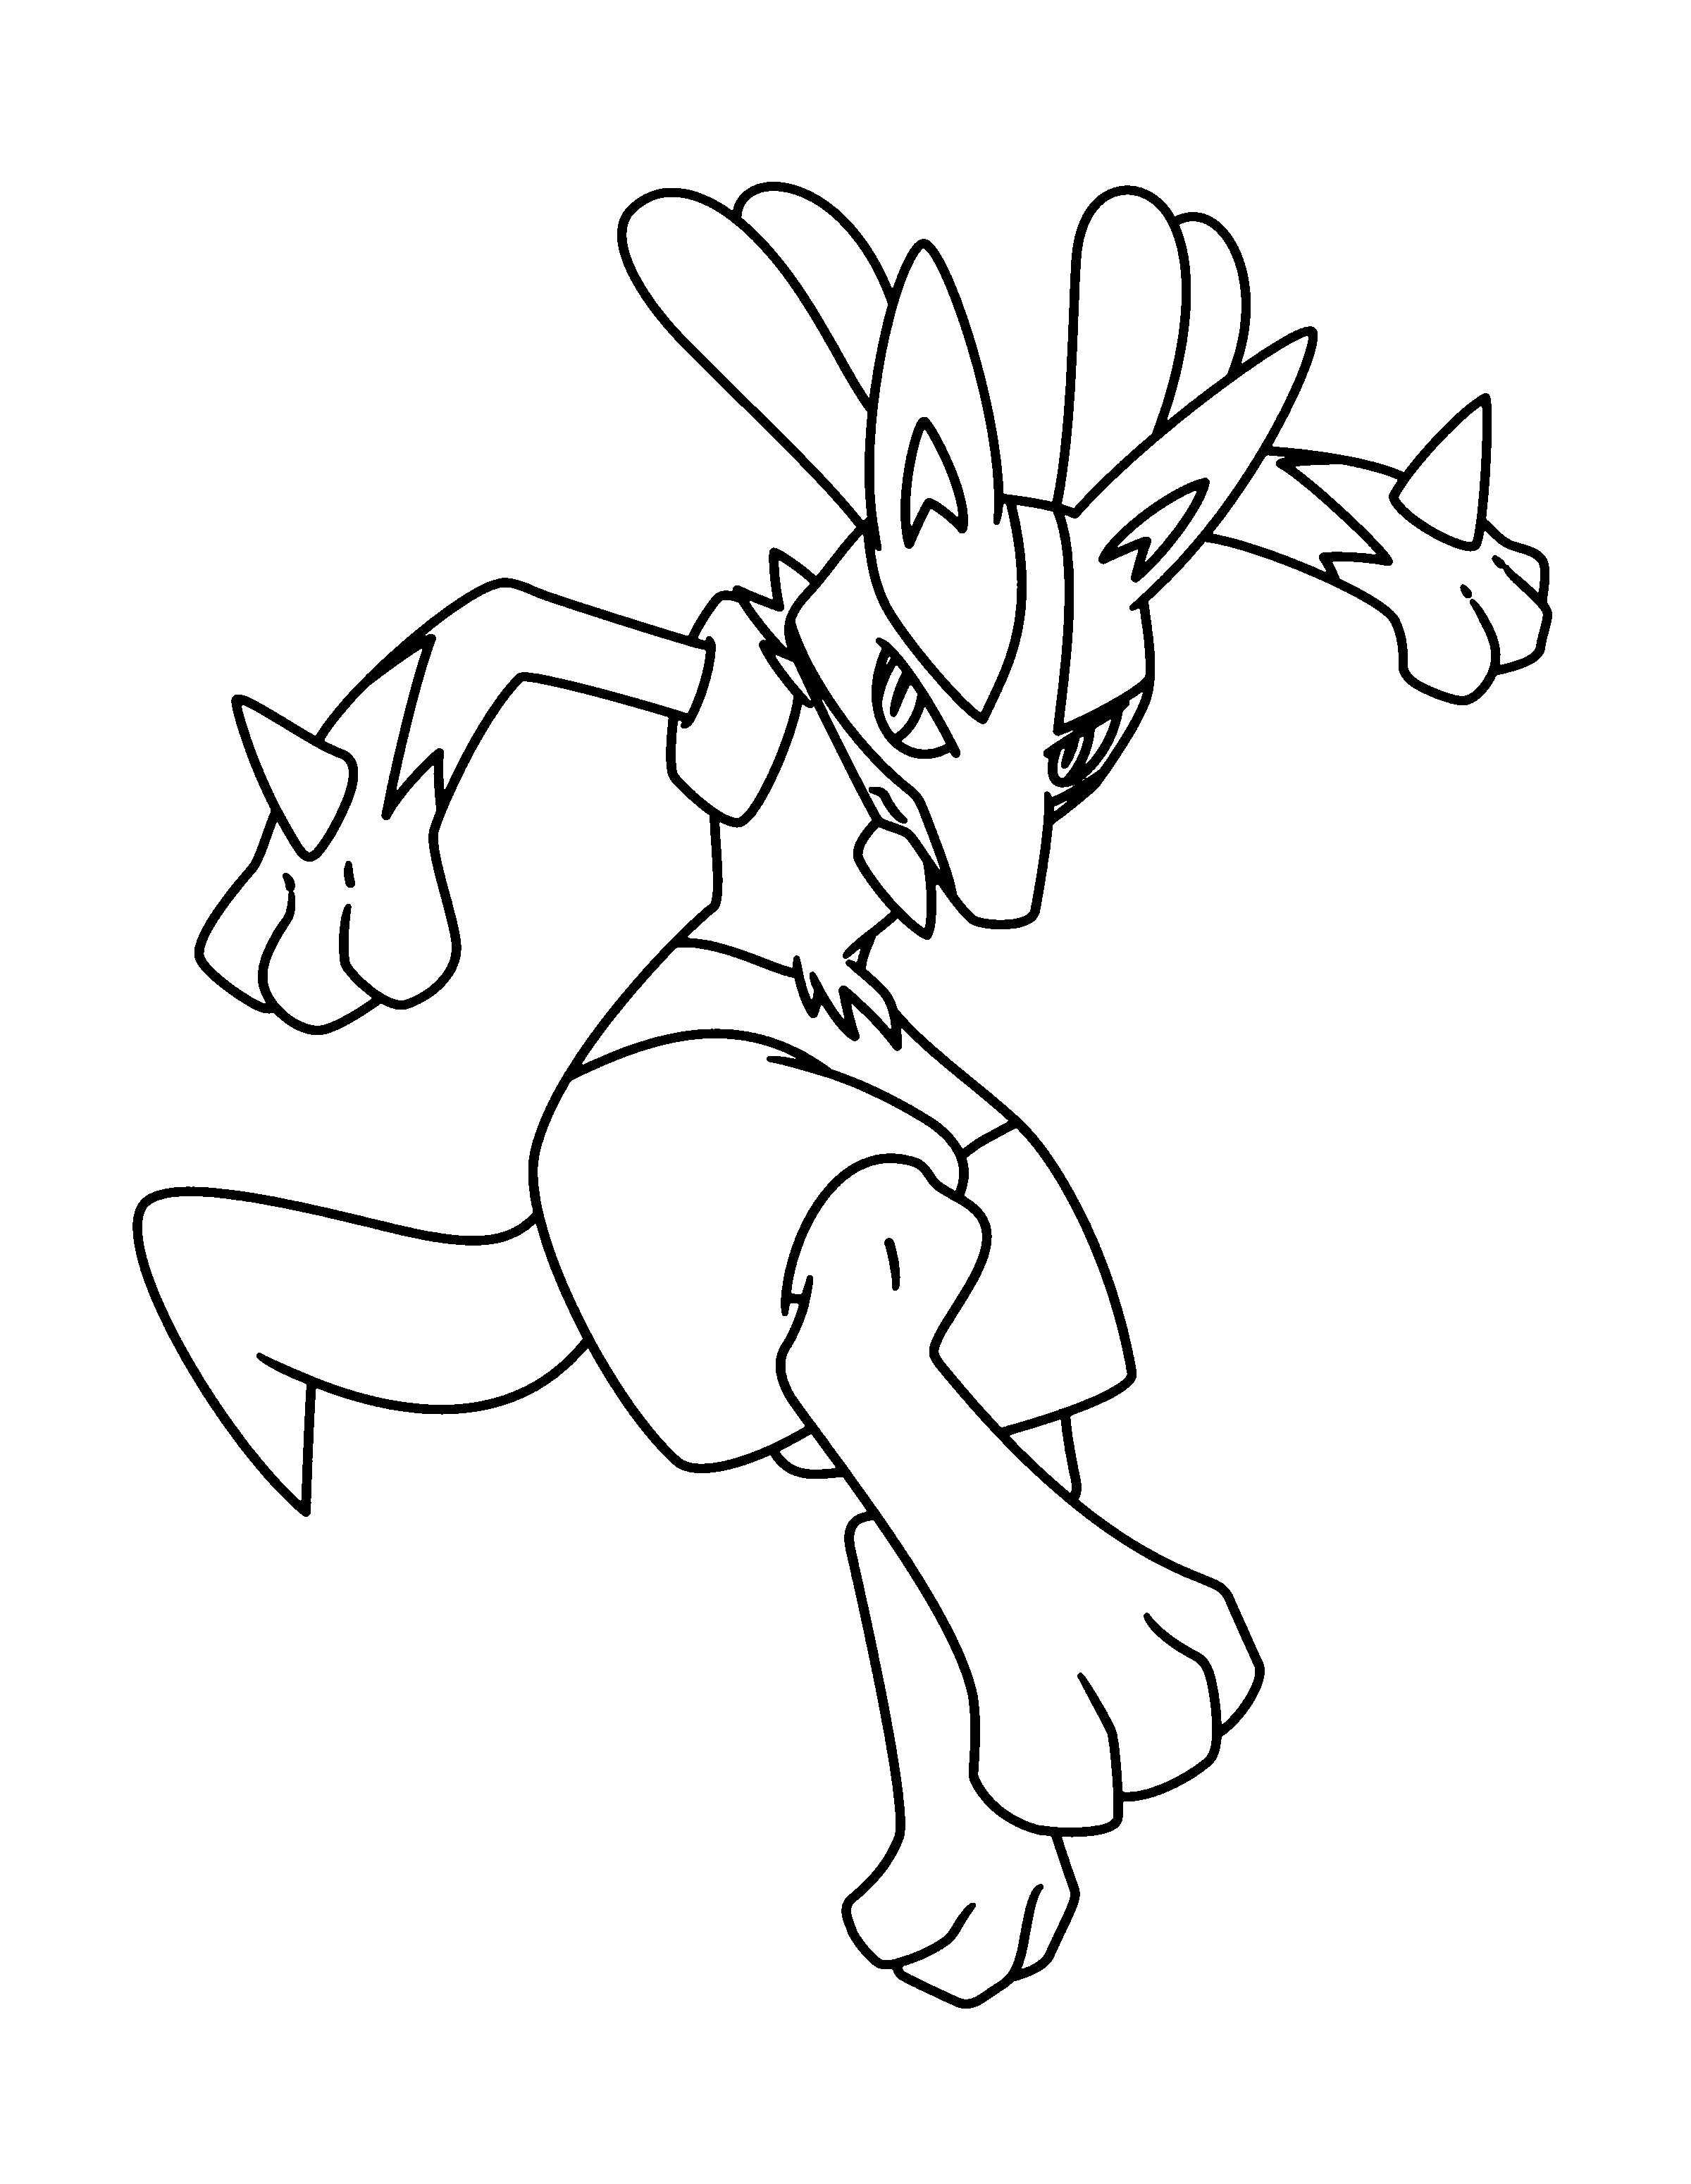 Coloring Page Pokemon Advanced Coloring Pages 190 Pokemon Coloring Pages Pokemon Coloring Coloring Pages